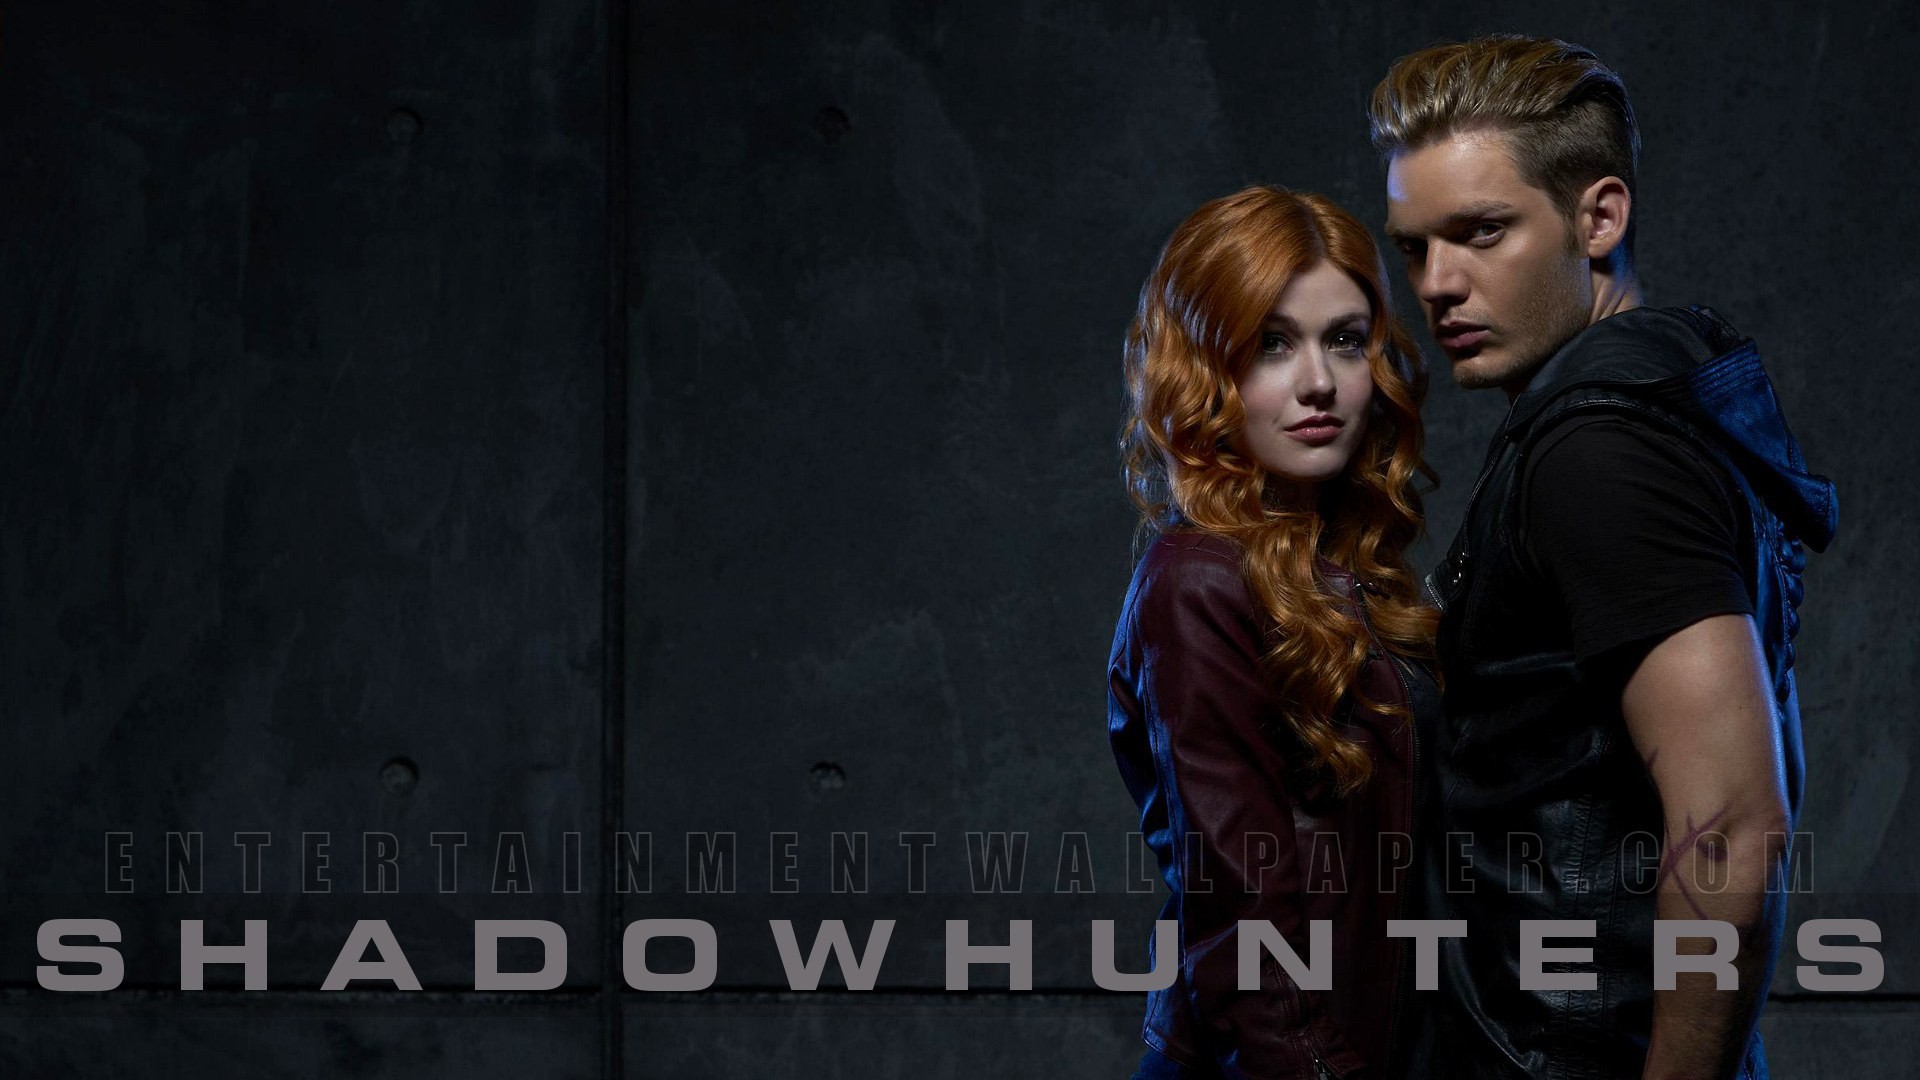 1920x1080 Shadowhunters Wallpaper - Original size, download now.